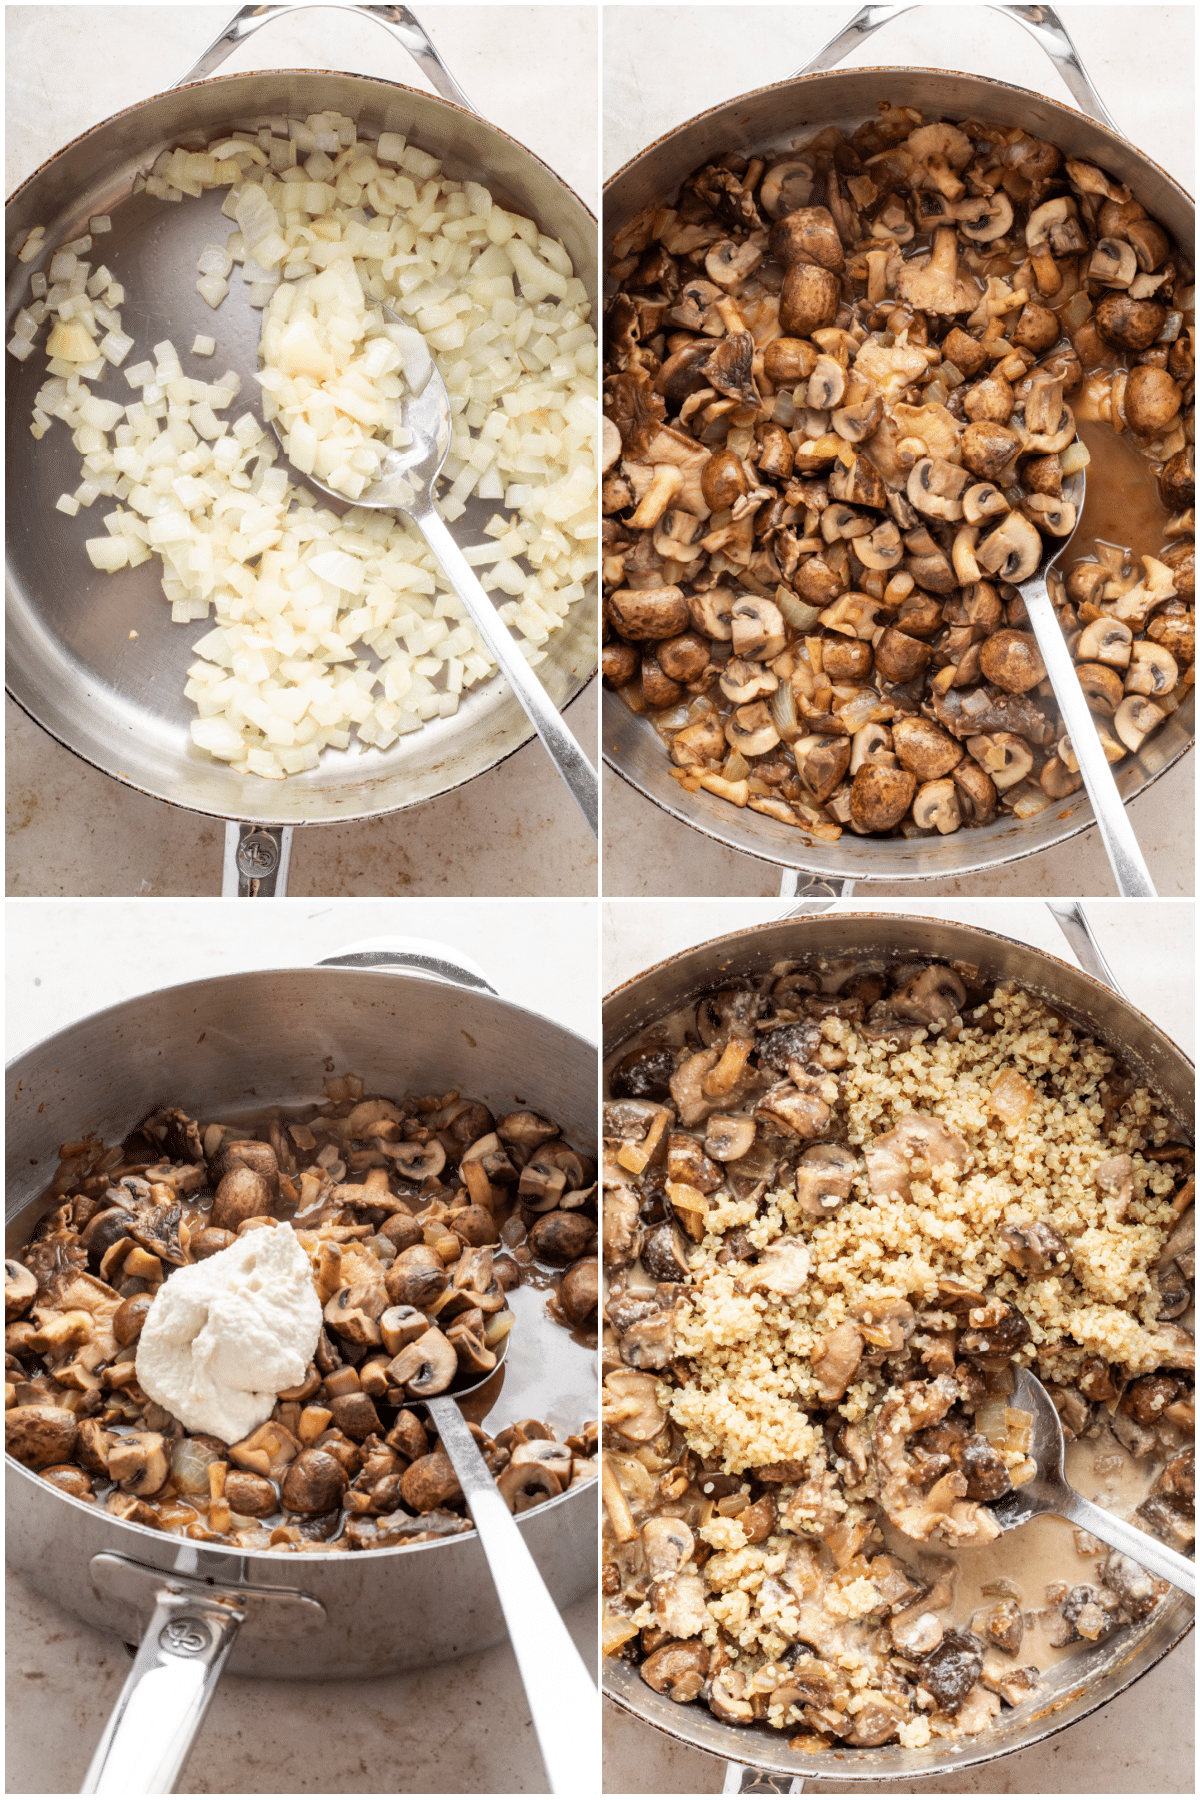 A four image collage showing how to make a mushroom pie: sauté onions, add mushrooms and continue to cook, add cashew cream, add cooked quinoa.